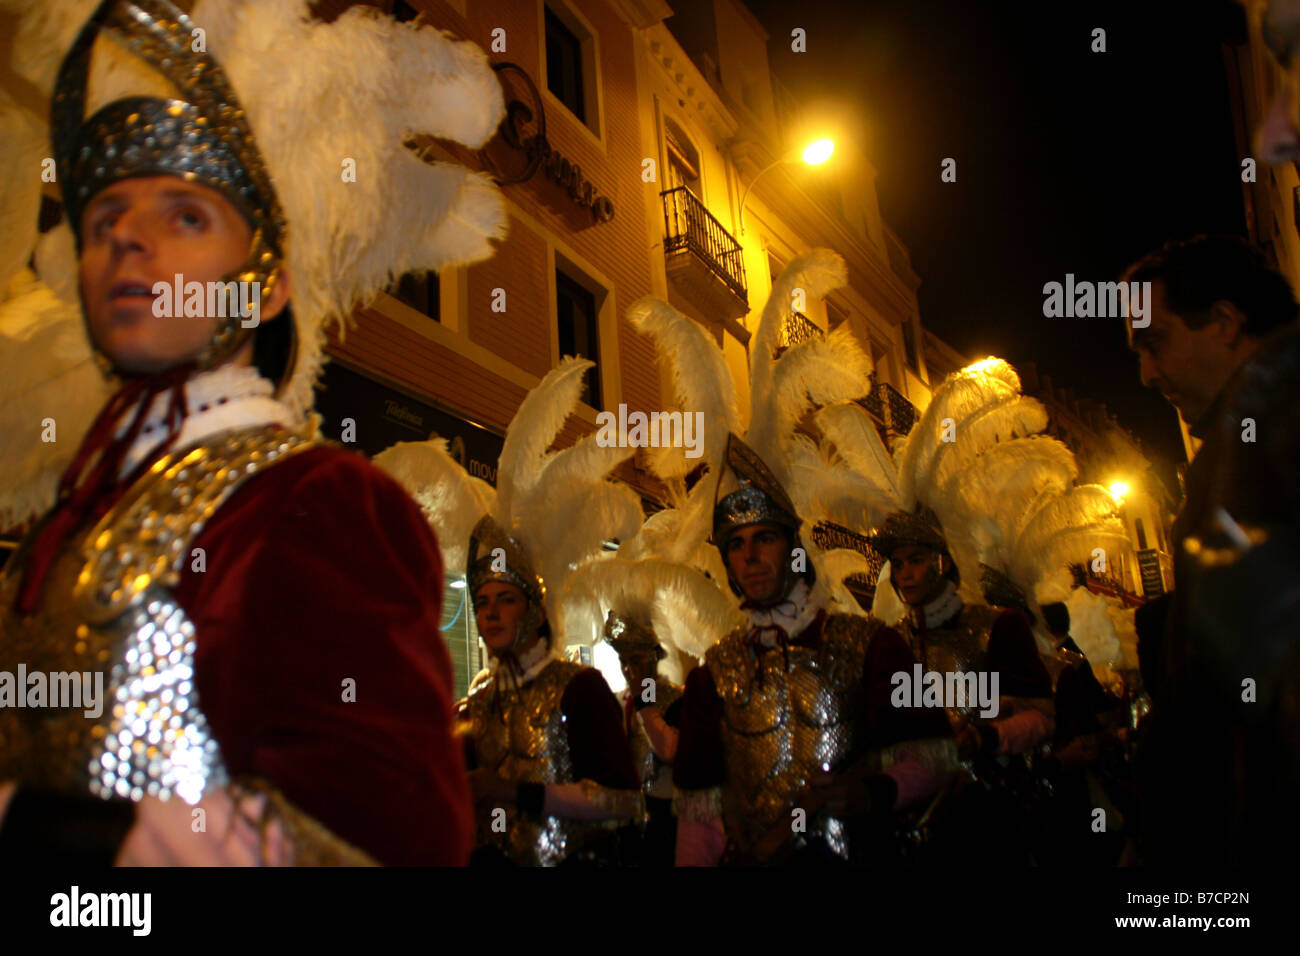 Procession of a fraternity, Cofradia, during the Holy Week, in the night, dressed as Romans, with a helmet and feather jewelry, Stock Photo